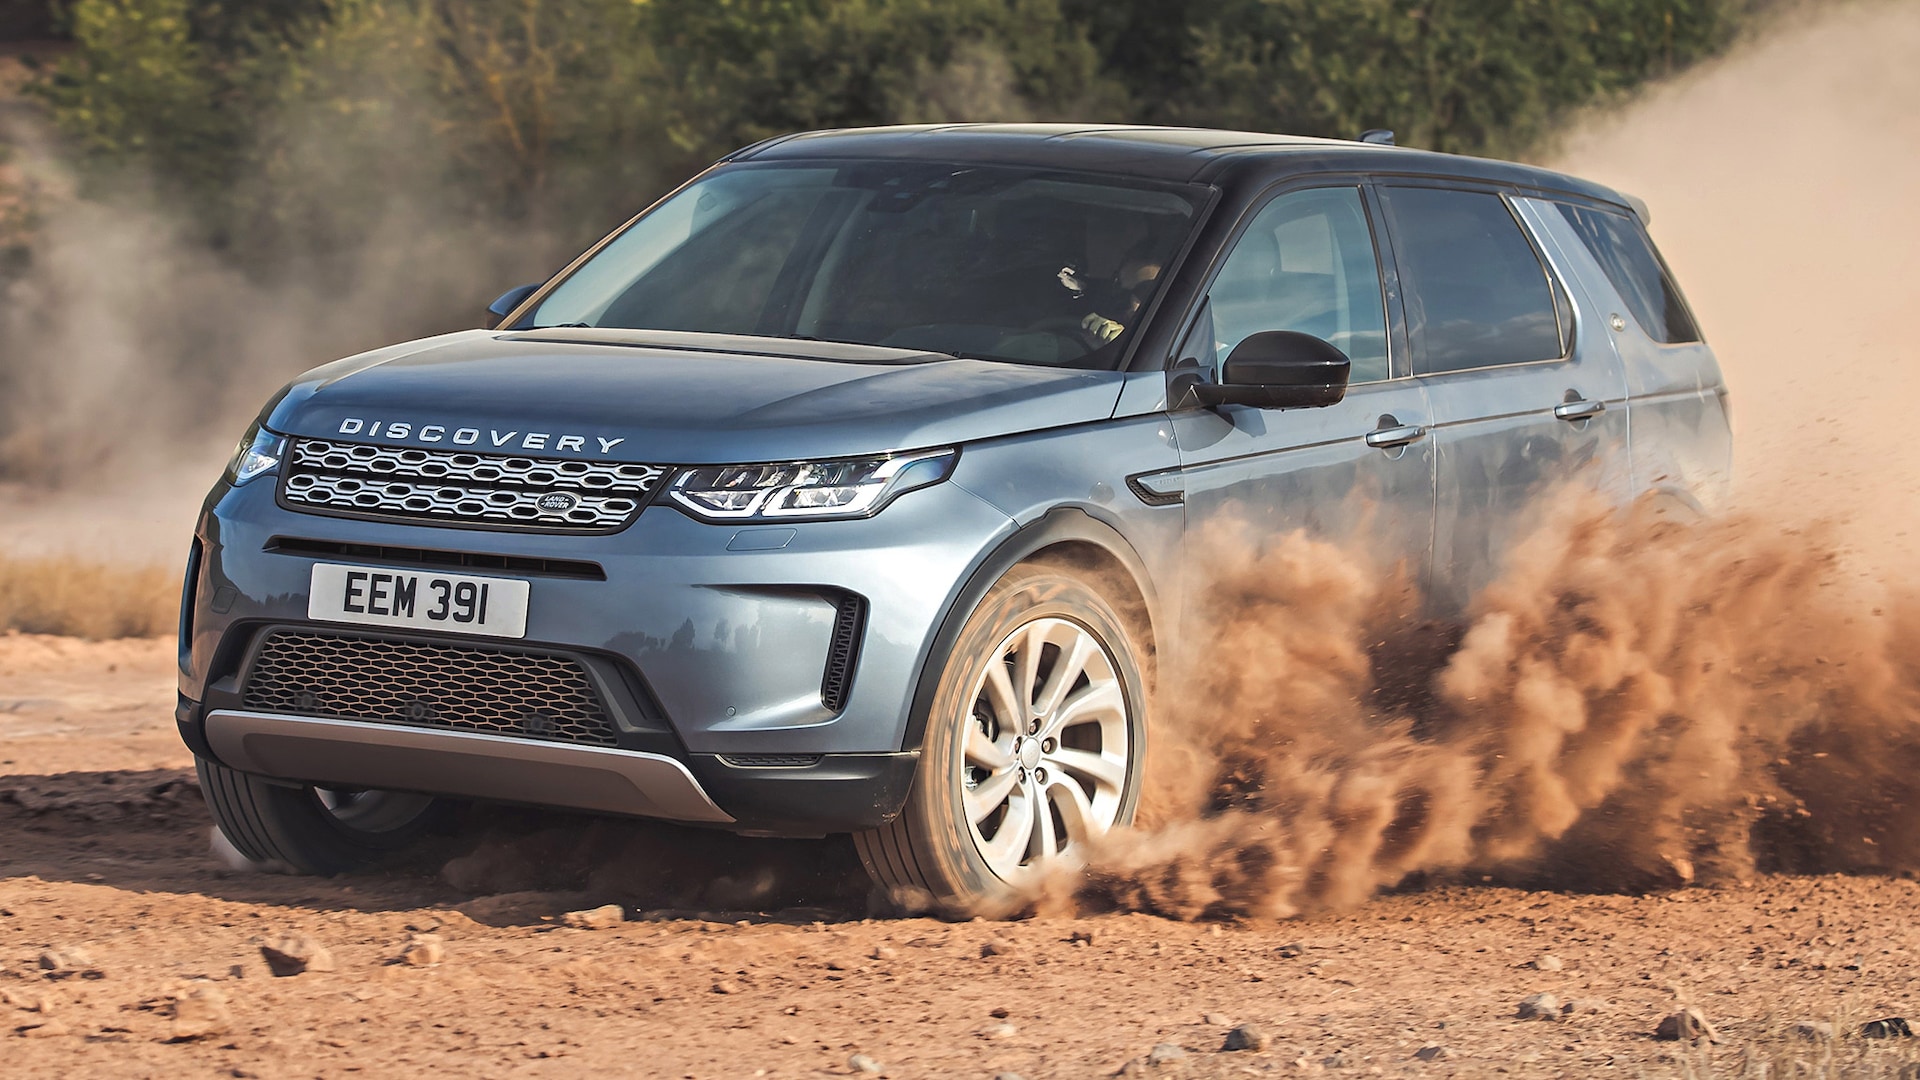 2022 Land Rover Discovery Sport Prices, Reviews, and Photos - MotorTrend